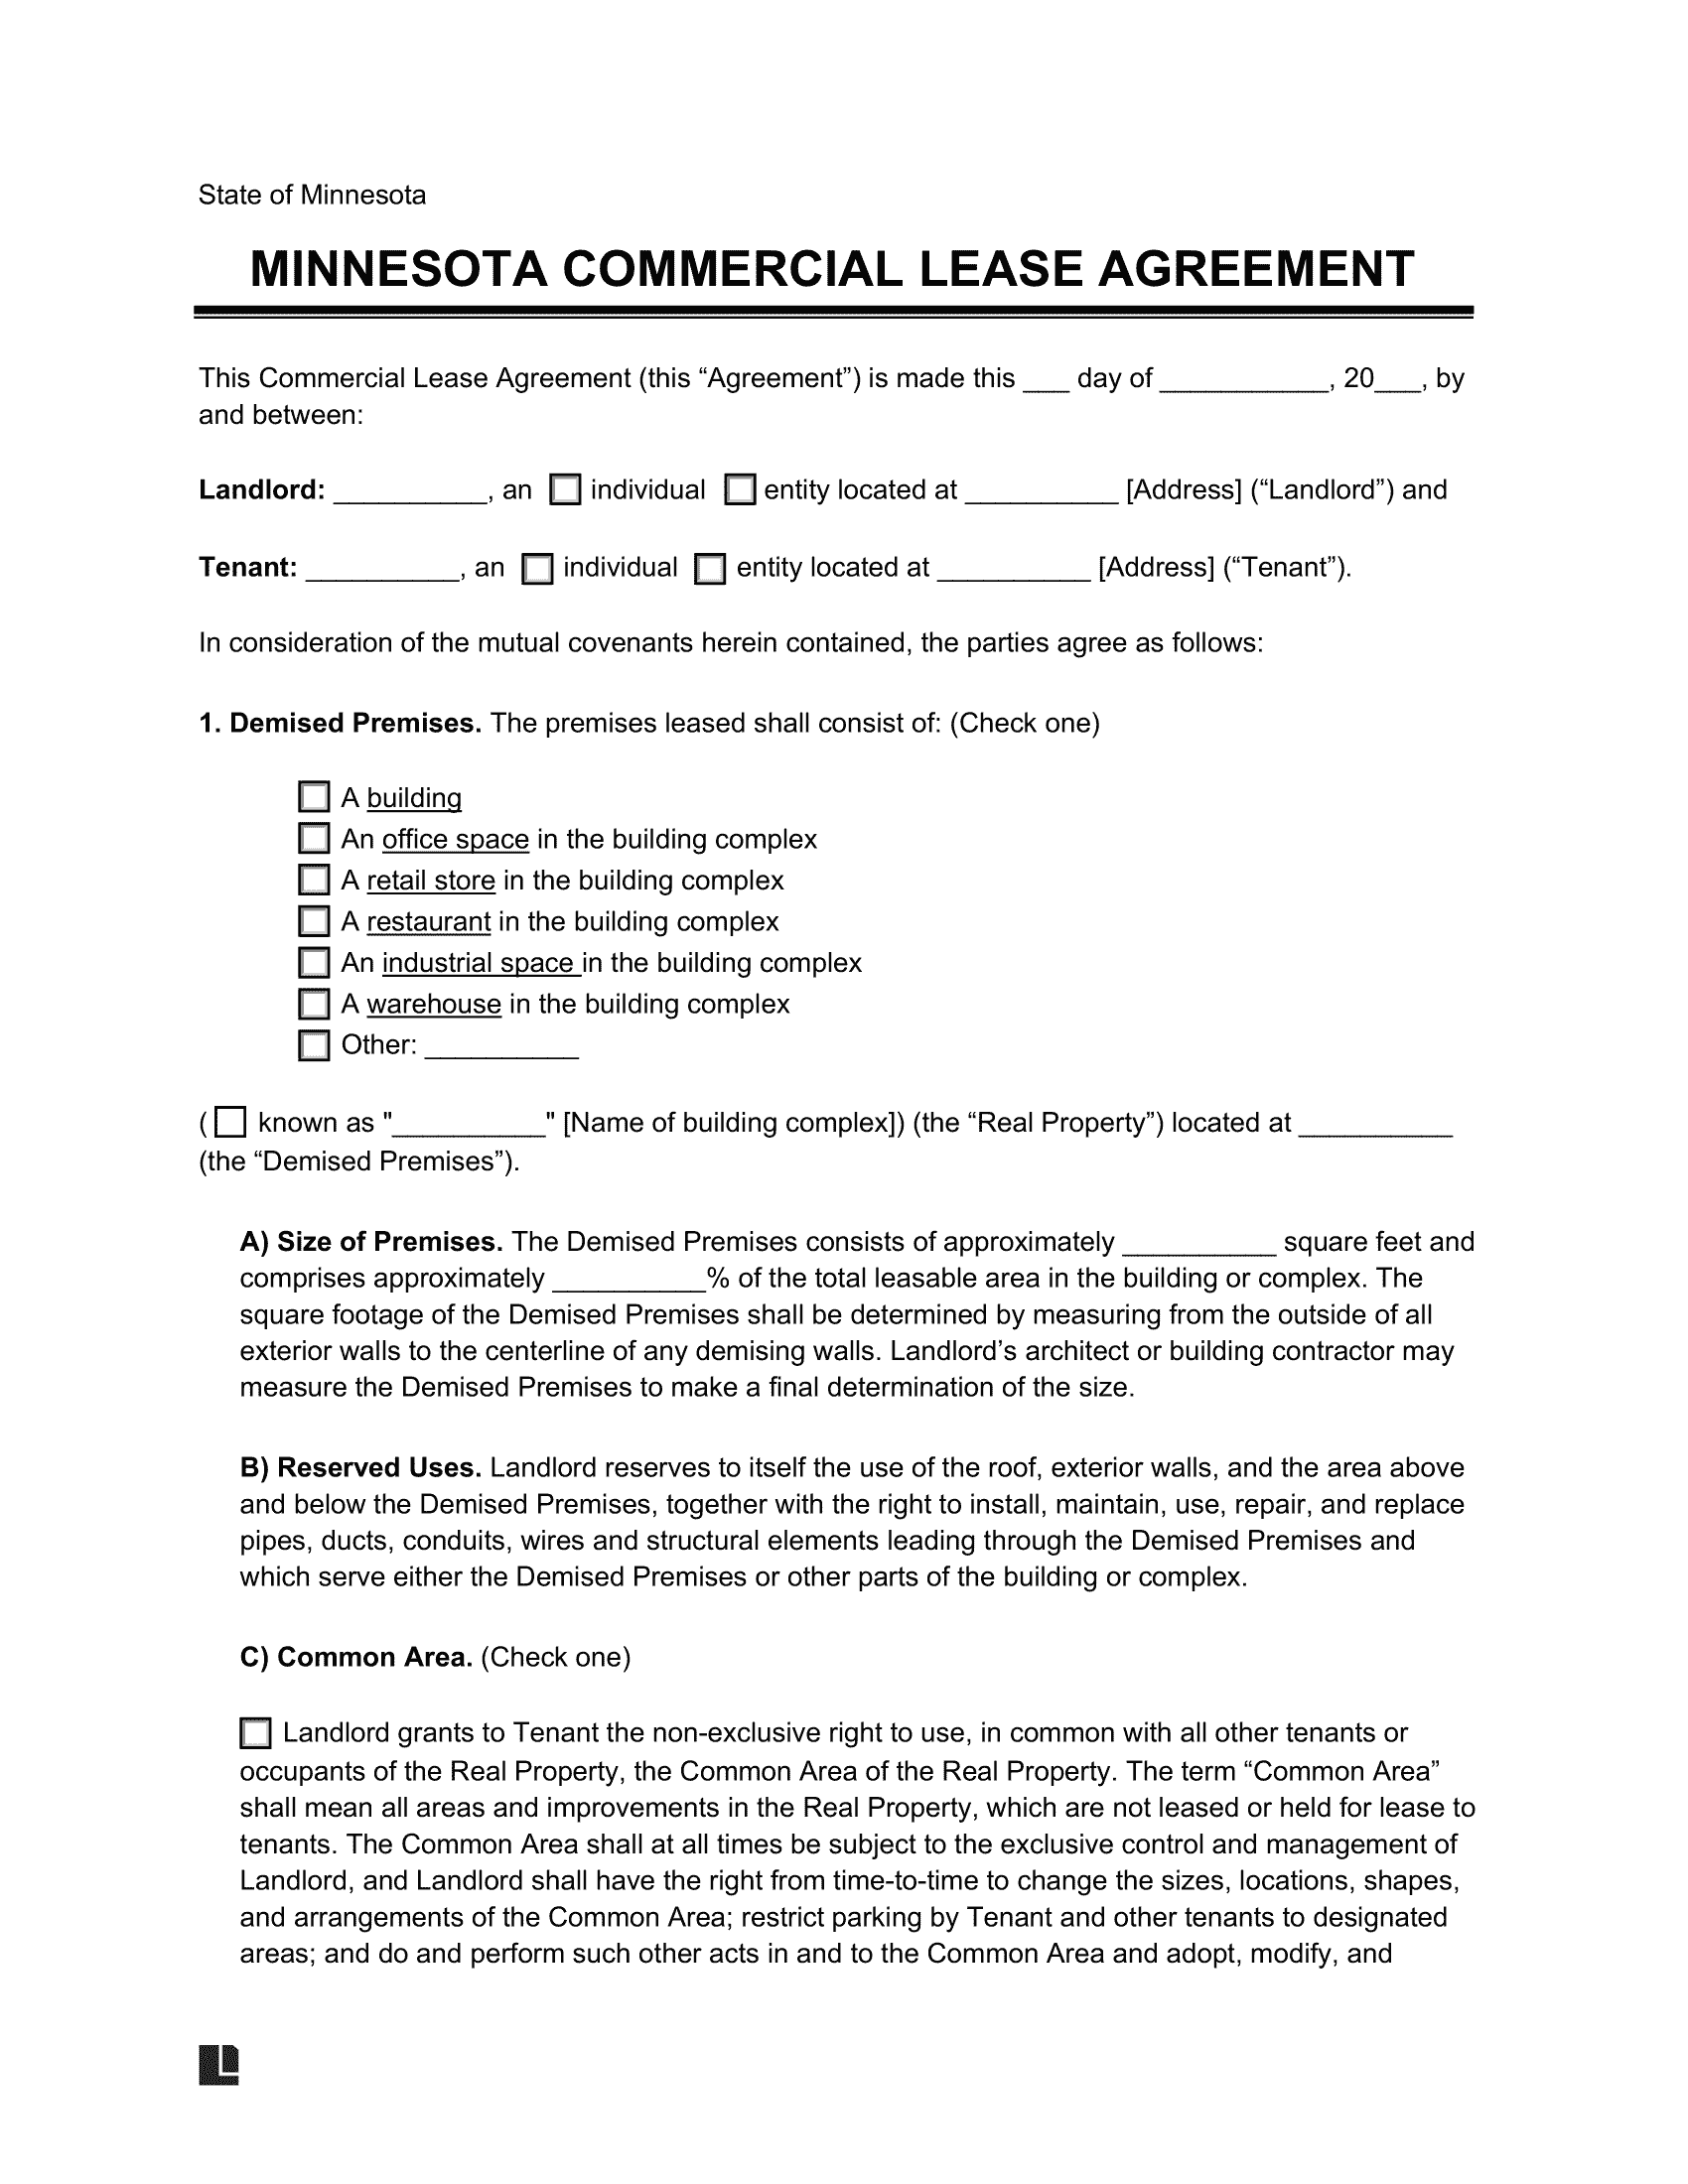 Minnesota Commercial Lease Agreement